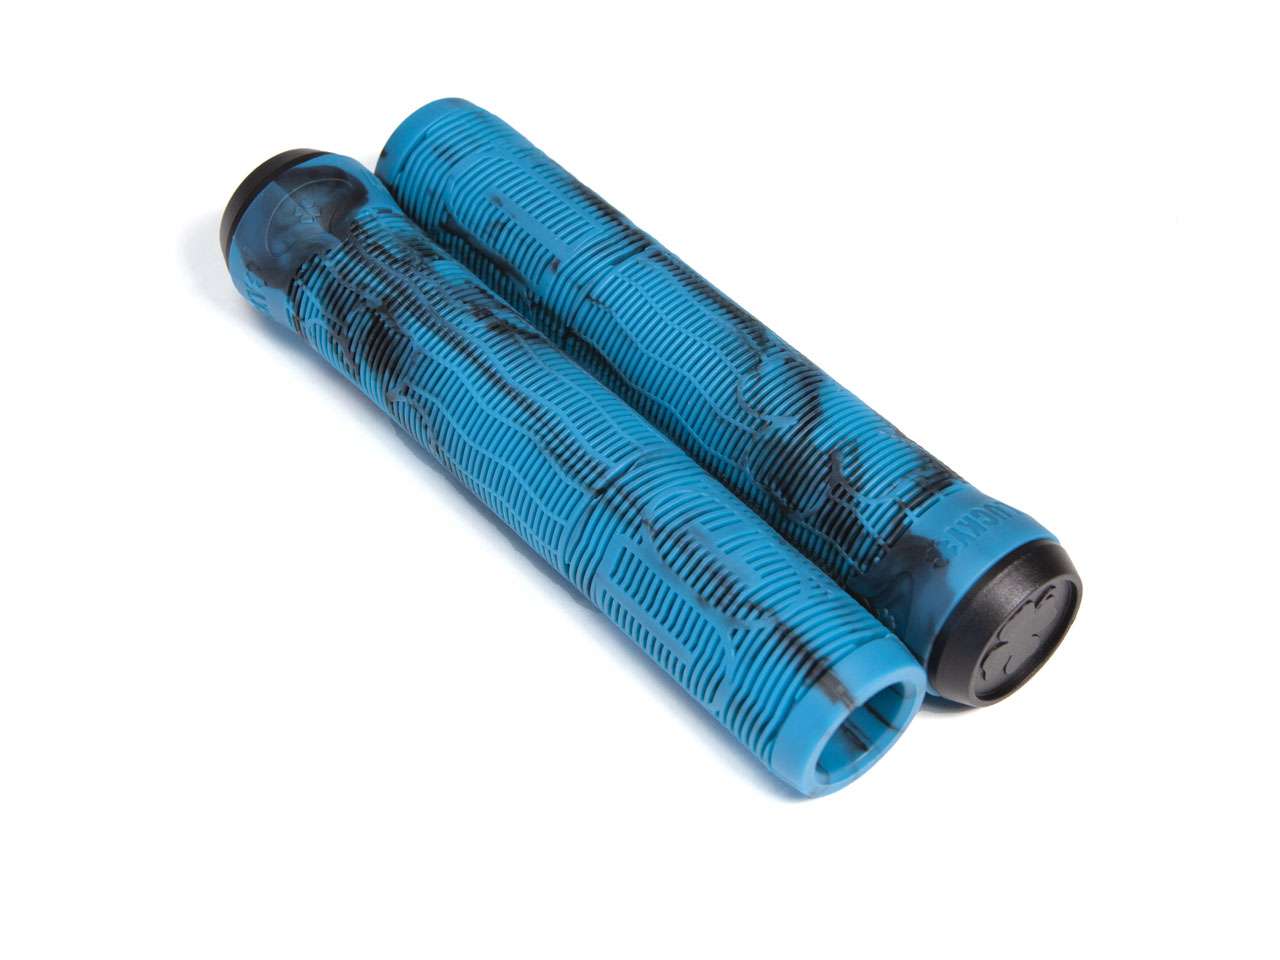 VICEGRIPS™ 2.0 Pro Scooter Grips Black/Teal